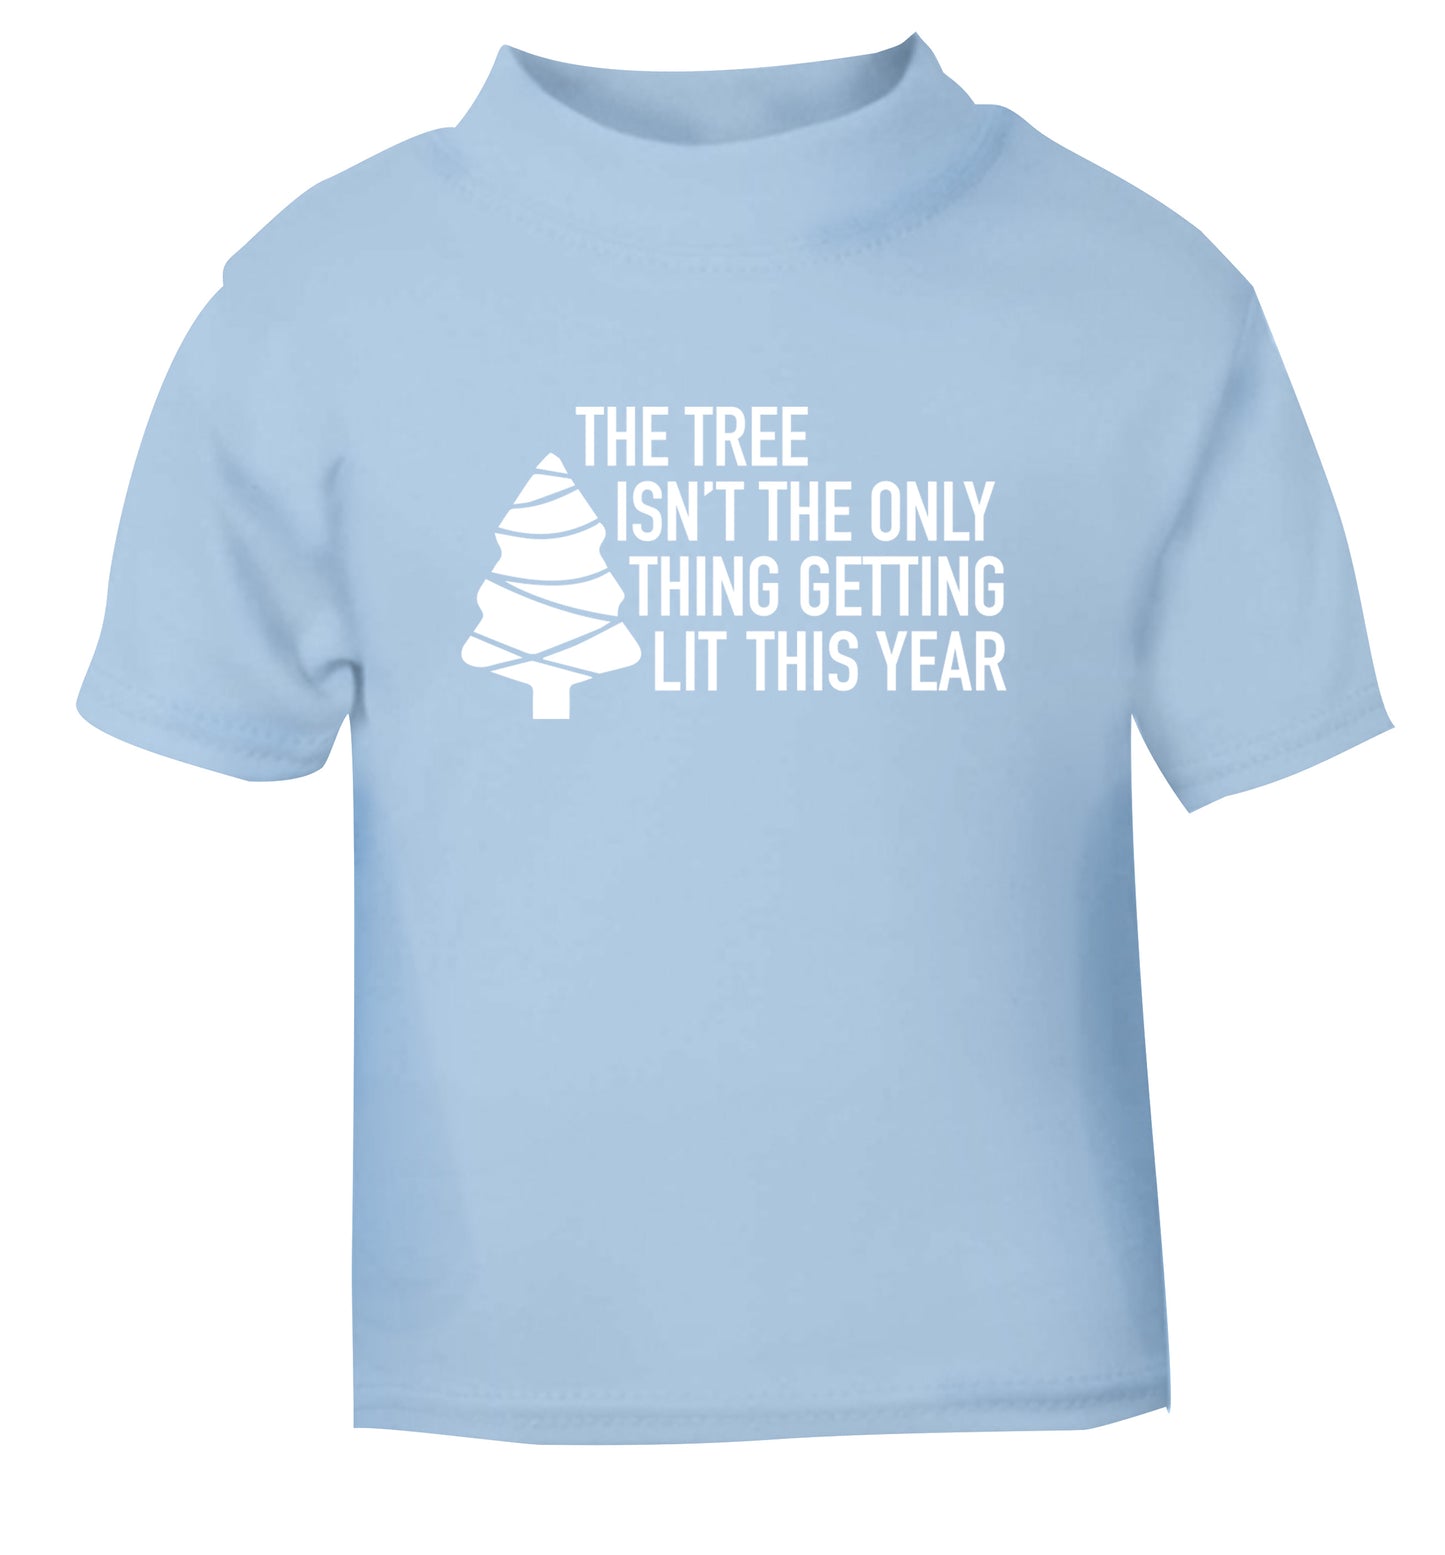 The tree isn't the only thing getting lit this year light blue Baby Toddler Tshirt 2 Years